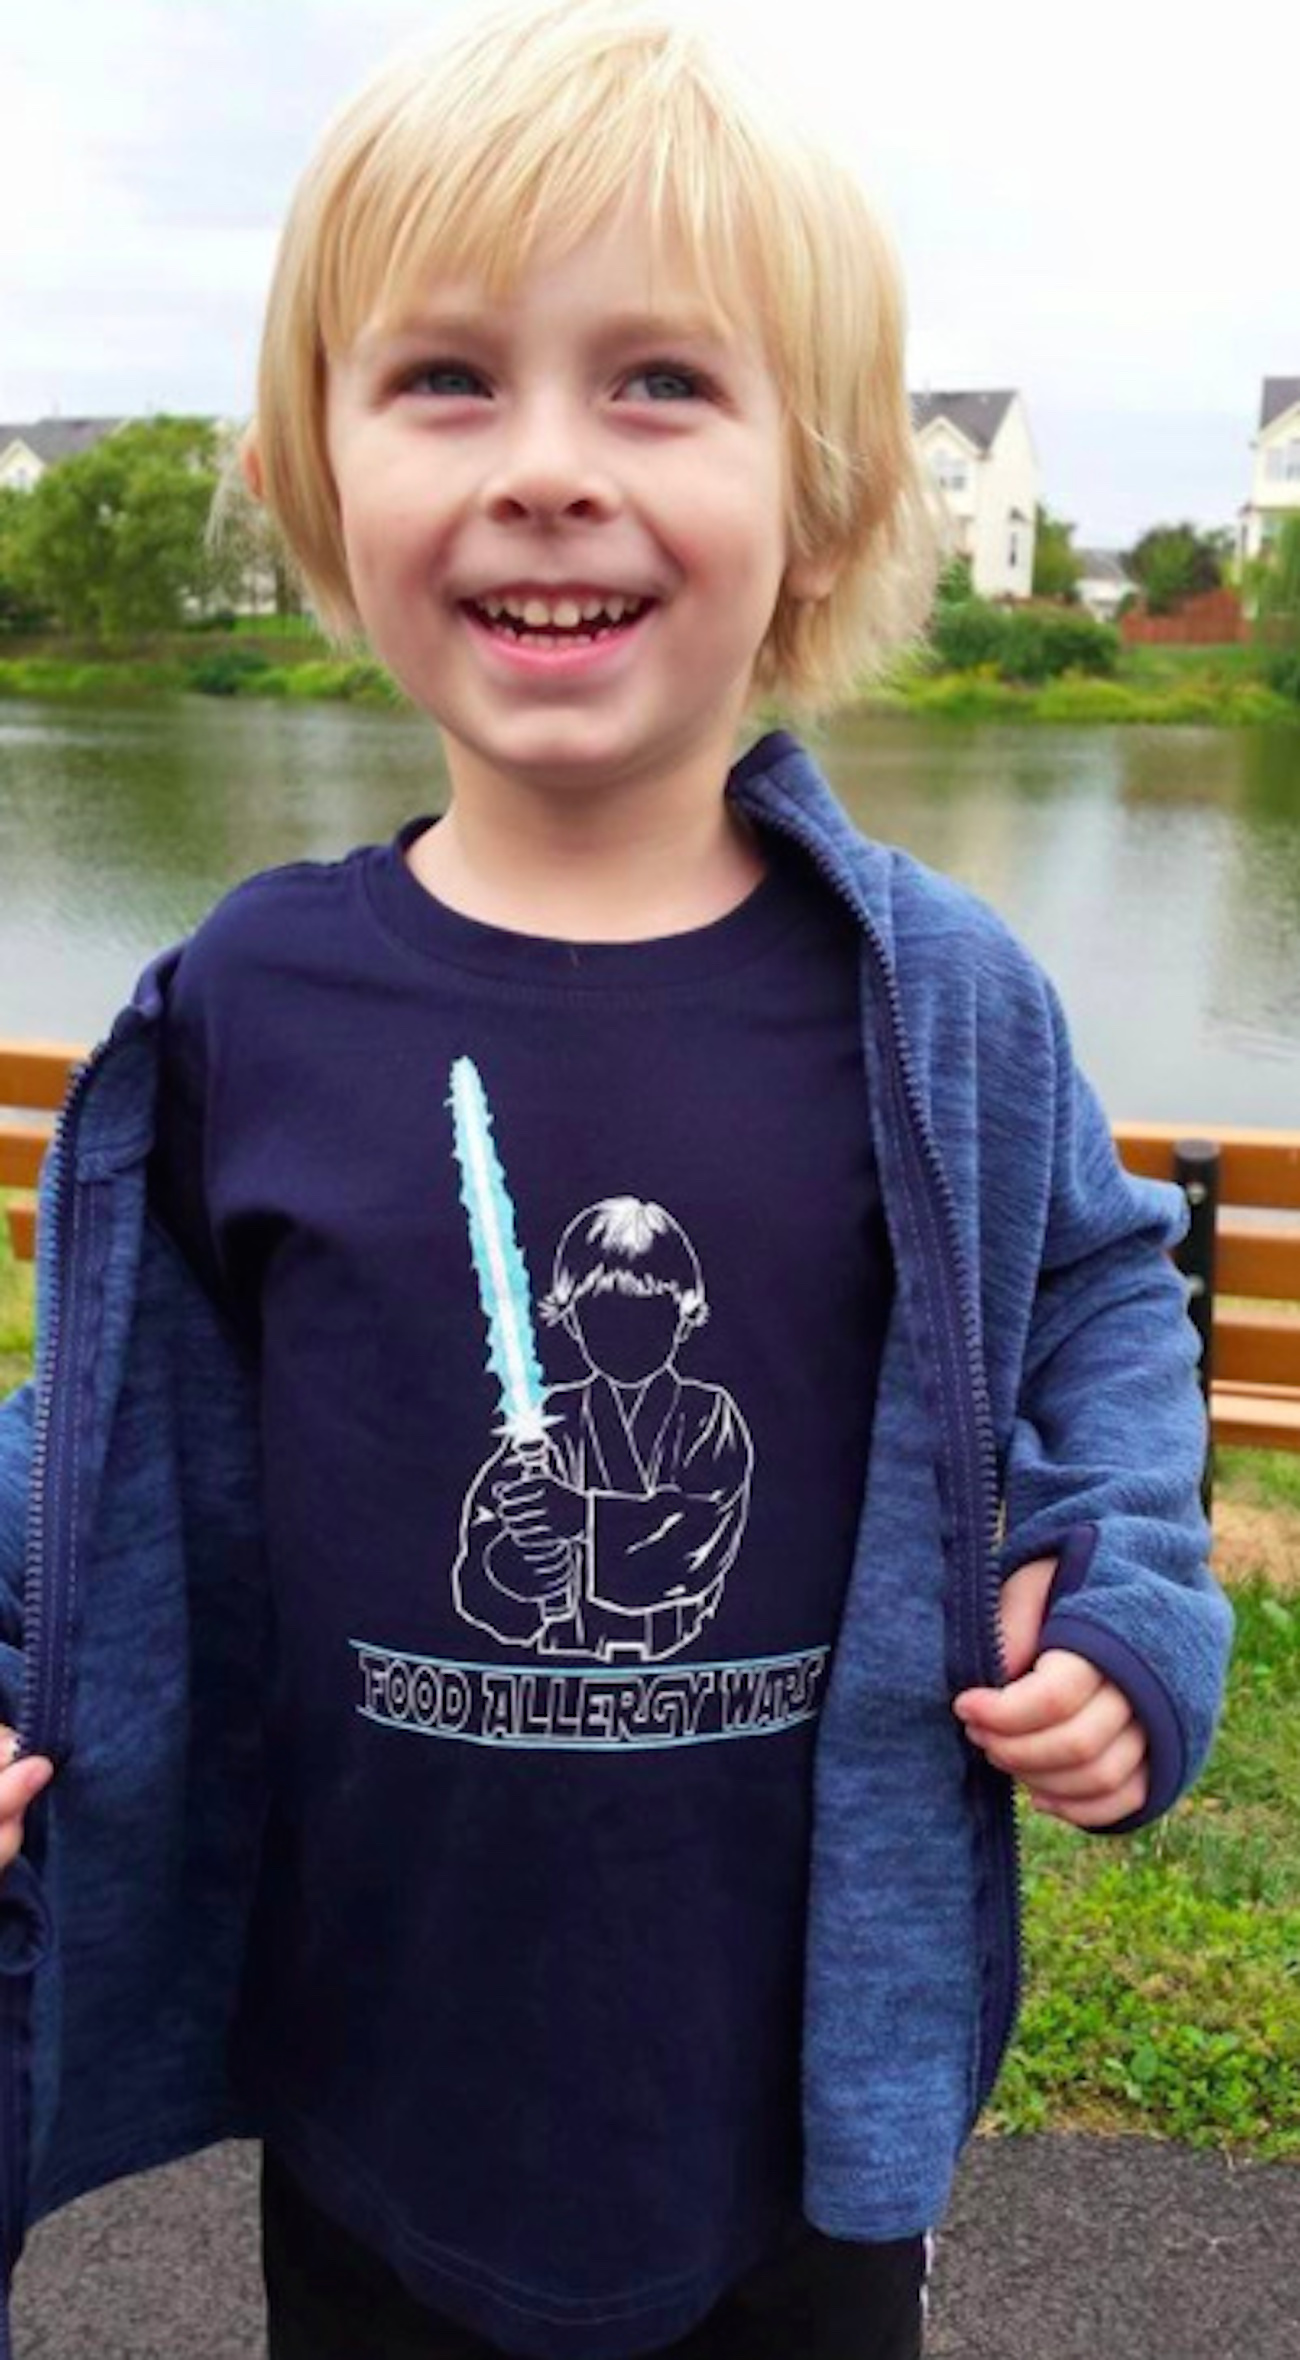 Boy wearing a jacket over a t-shirt that says food allergy wars and has an illustration of a boy holding a lightsaber